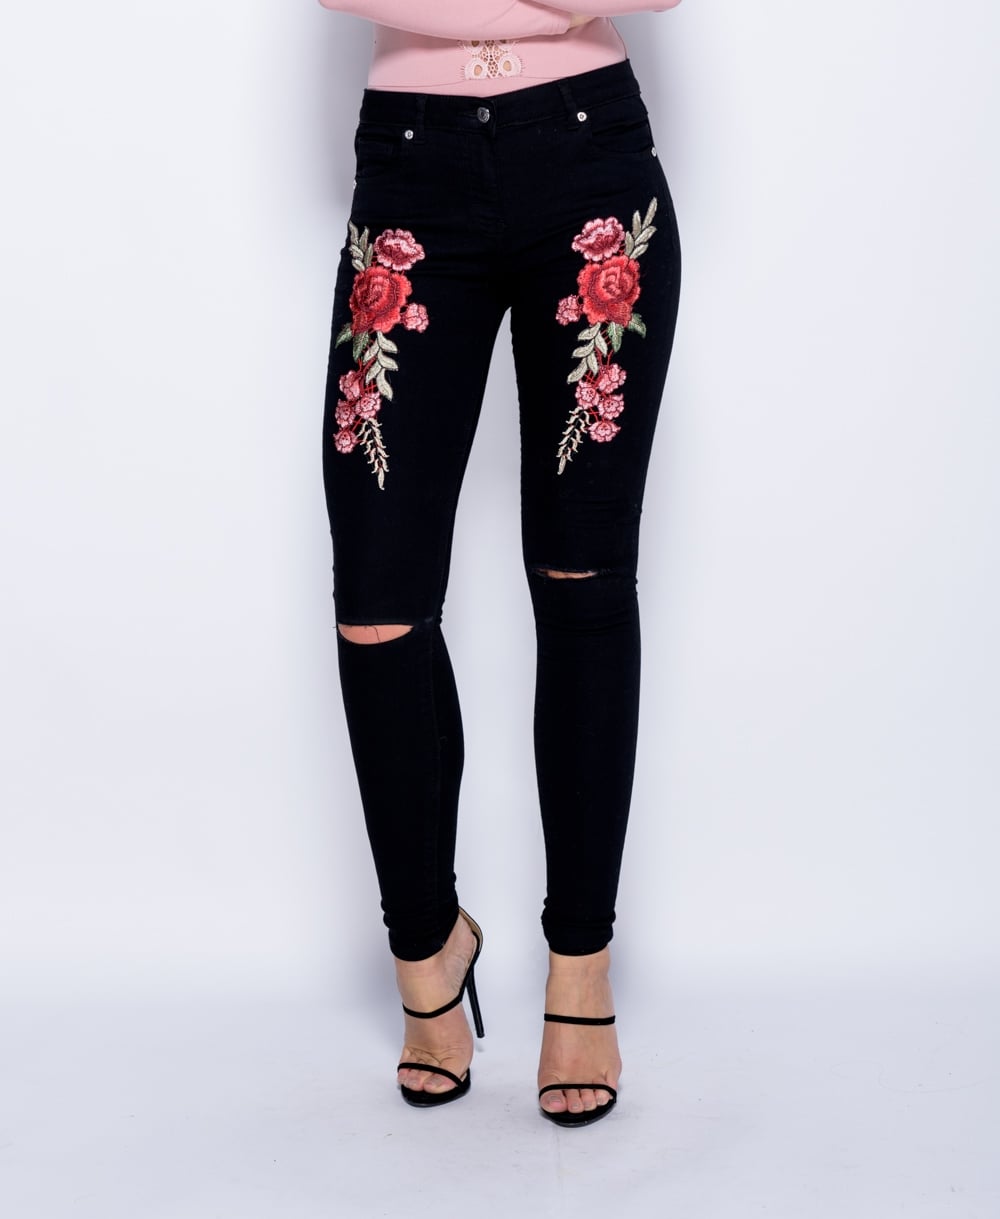 Ladies New Black Floral Embroidered Ripped Knee Skinny Flower Jeans | eBay